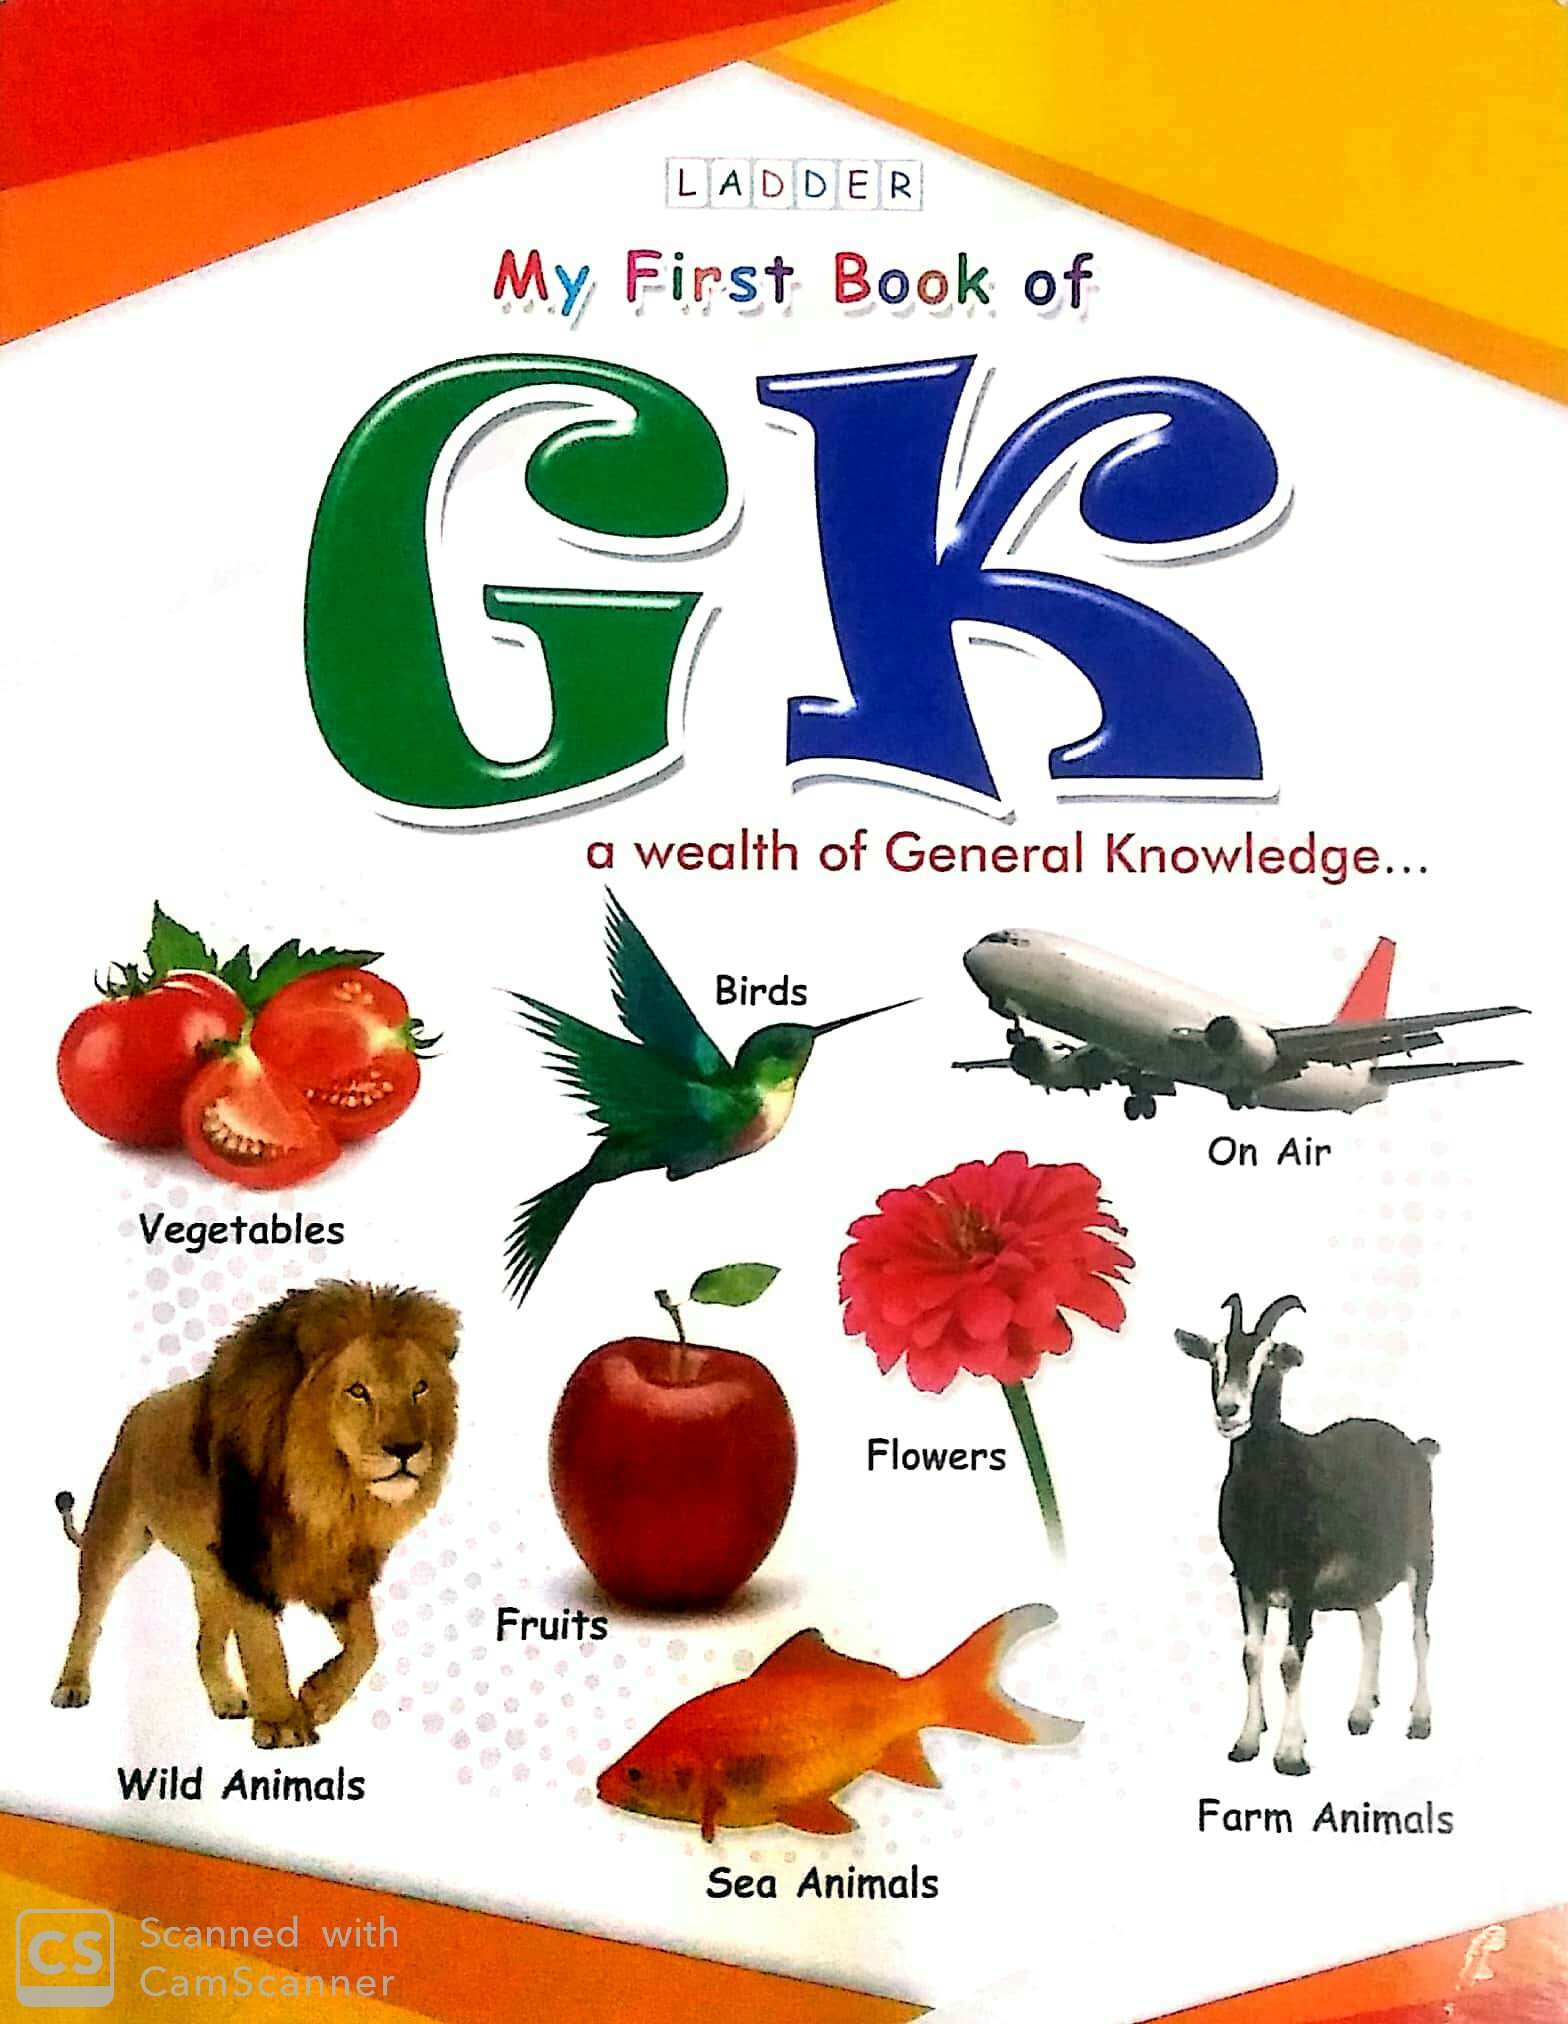 Routemybook - Buy Ladder My First Book Of General Knowledge by Ladder  Editorial Board Online at Lowest Price in India